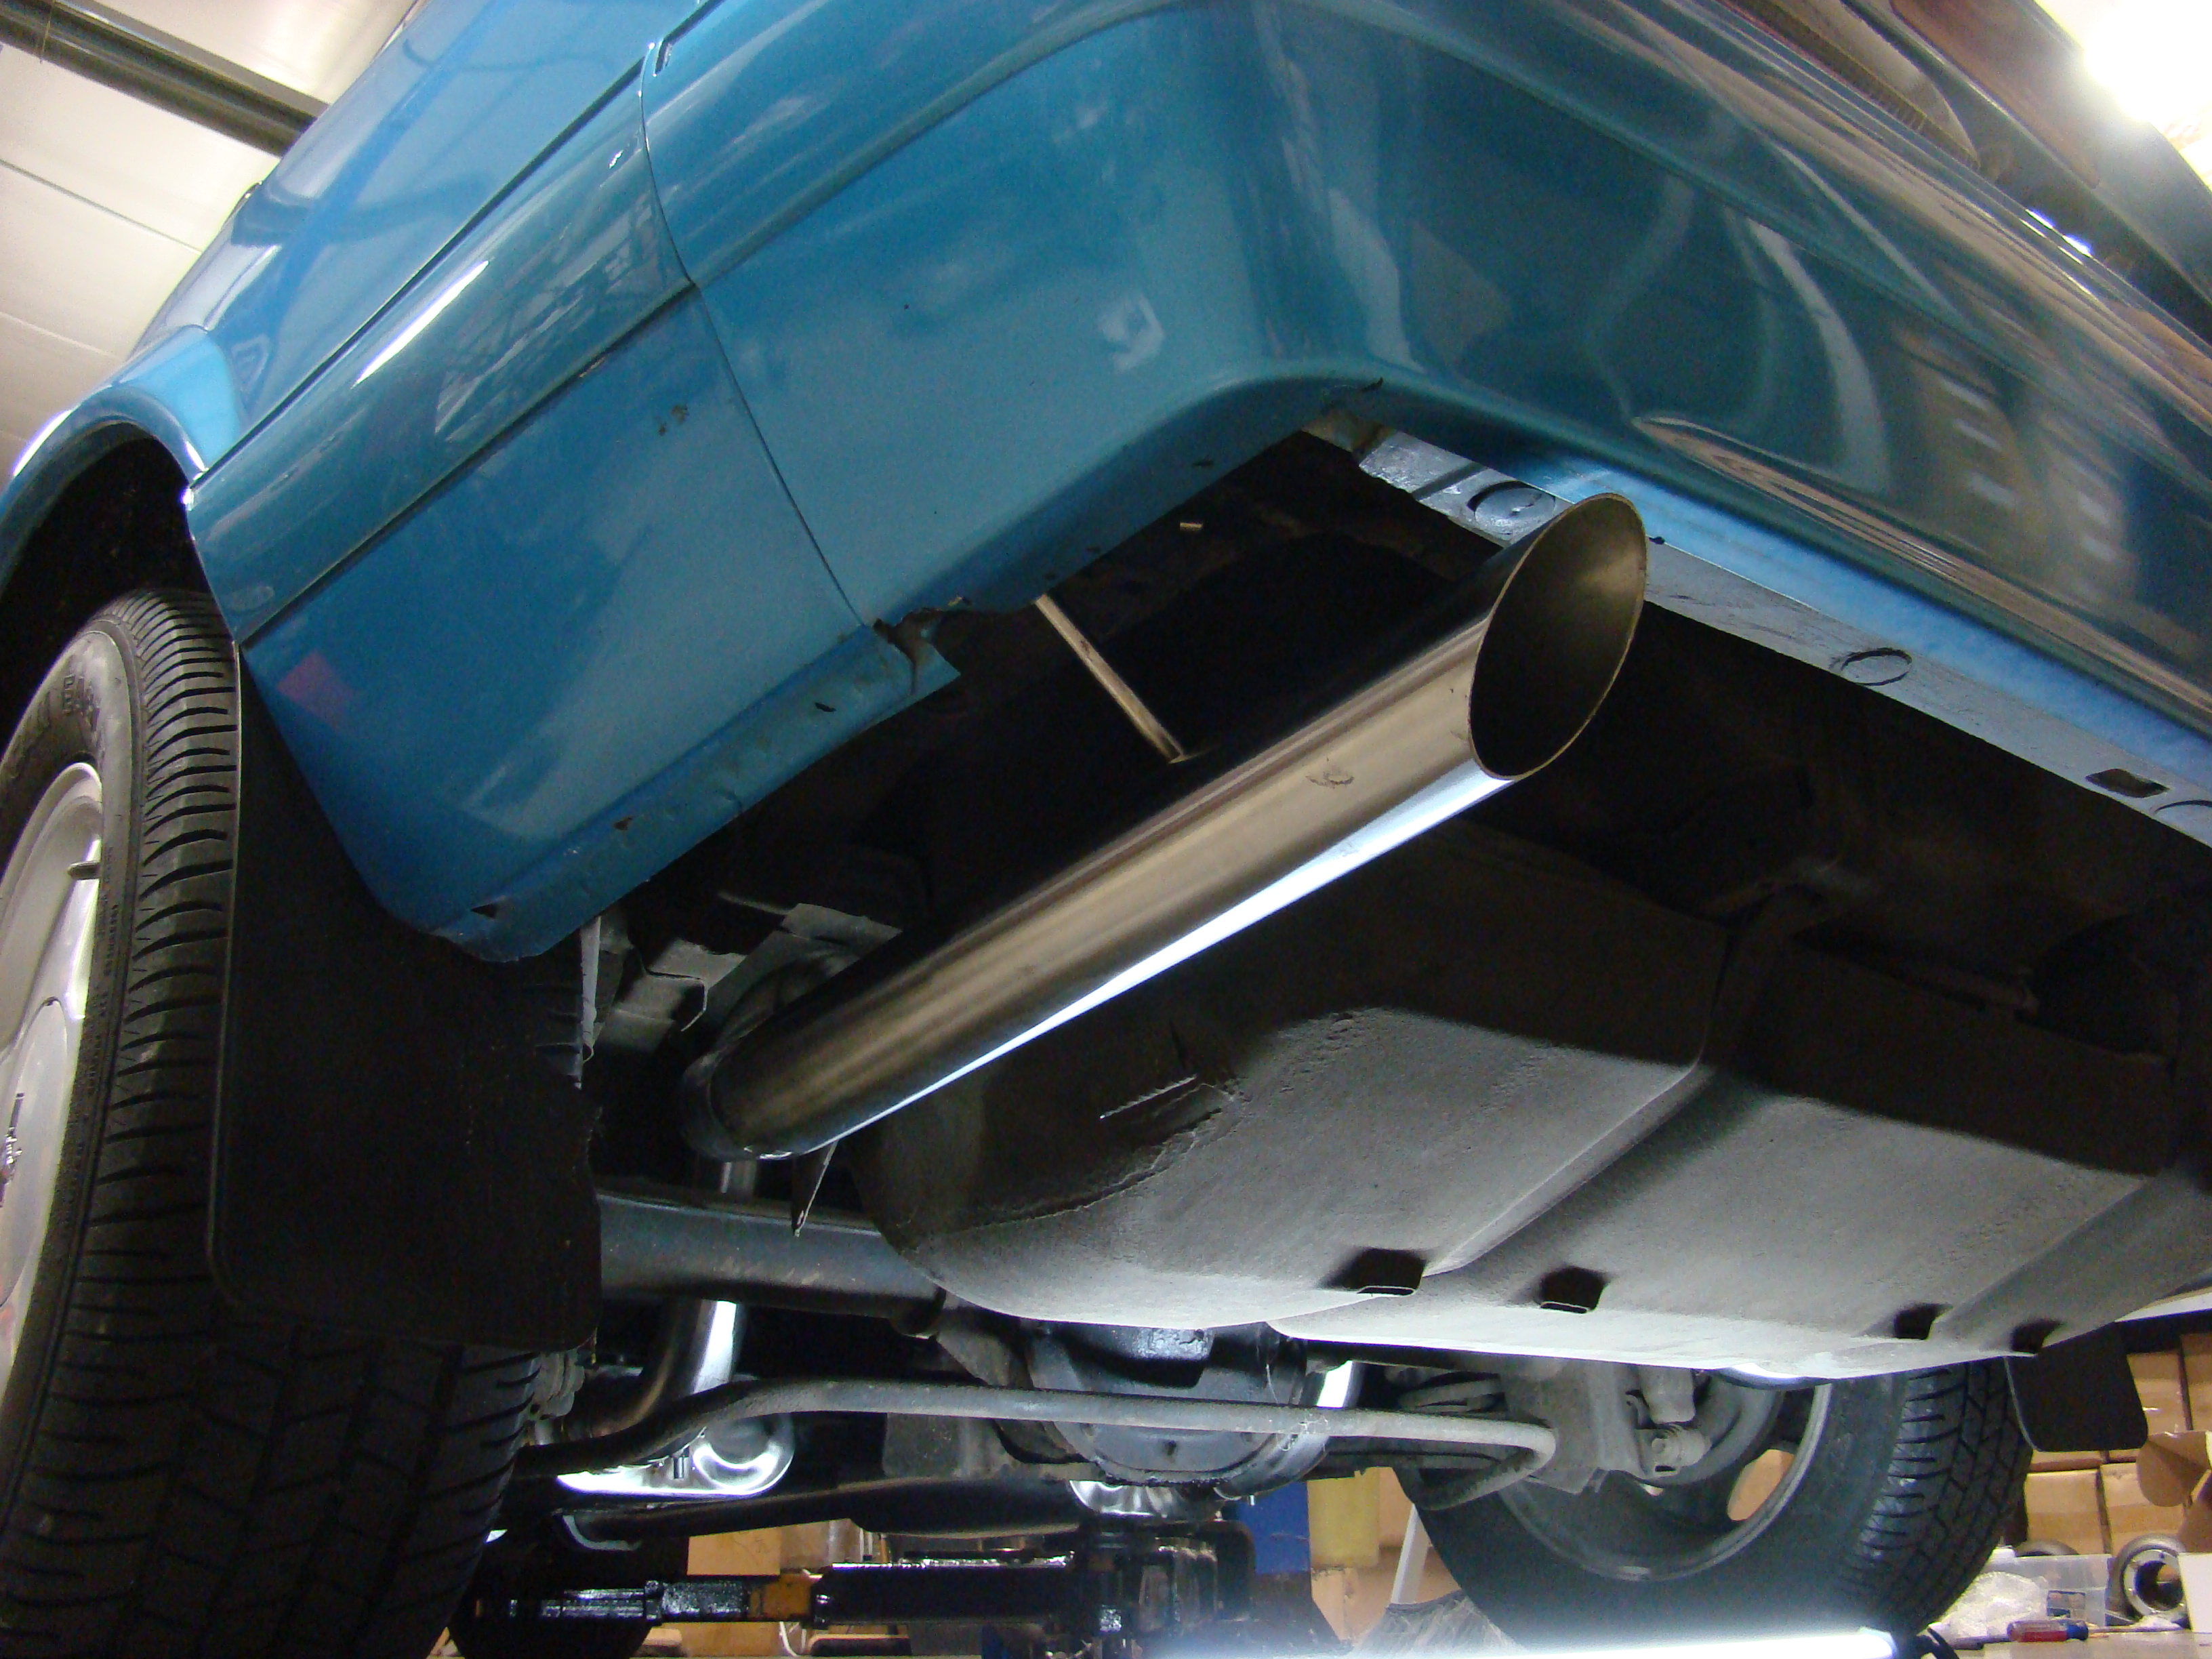 On 3 Performance Mustang Foxbody 5.0 LX Cat-back Exhaust System 1987